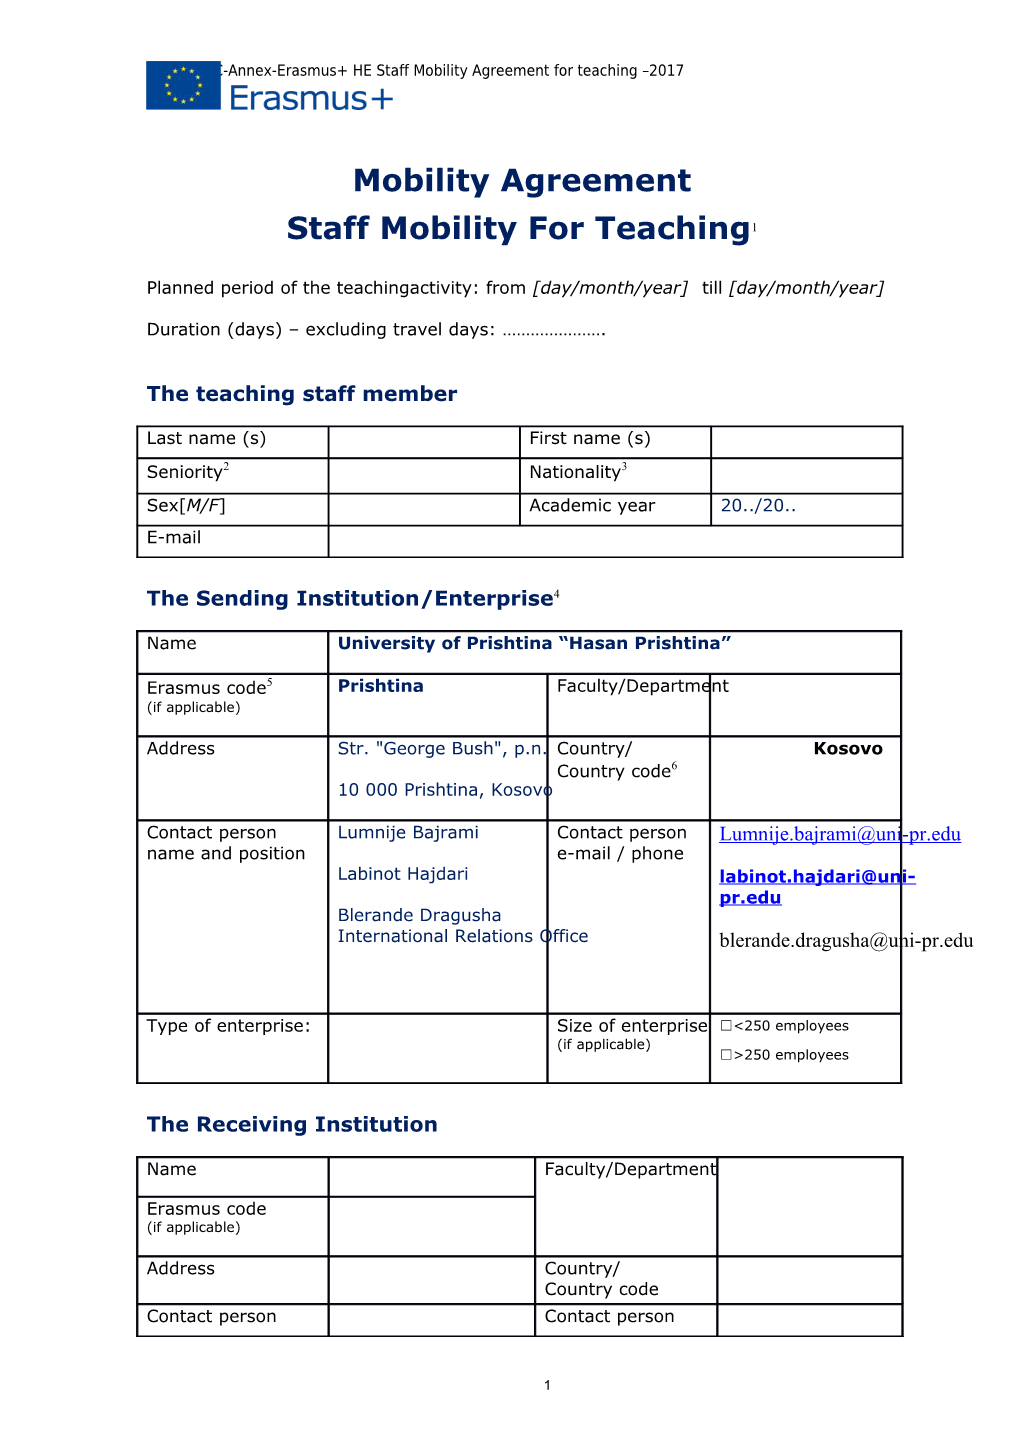 Gfna-II.7-C-Annex-Erasmus+ HE Staff Mobility Agreement for Teaching 2017